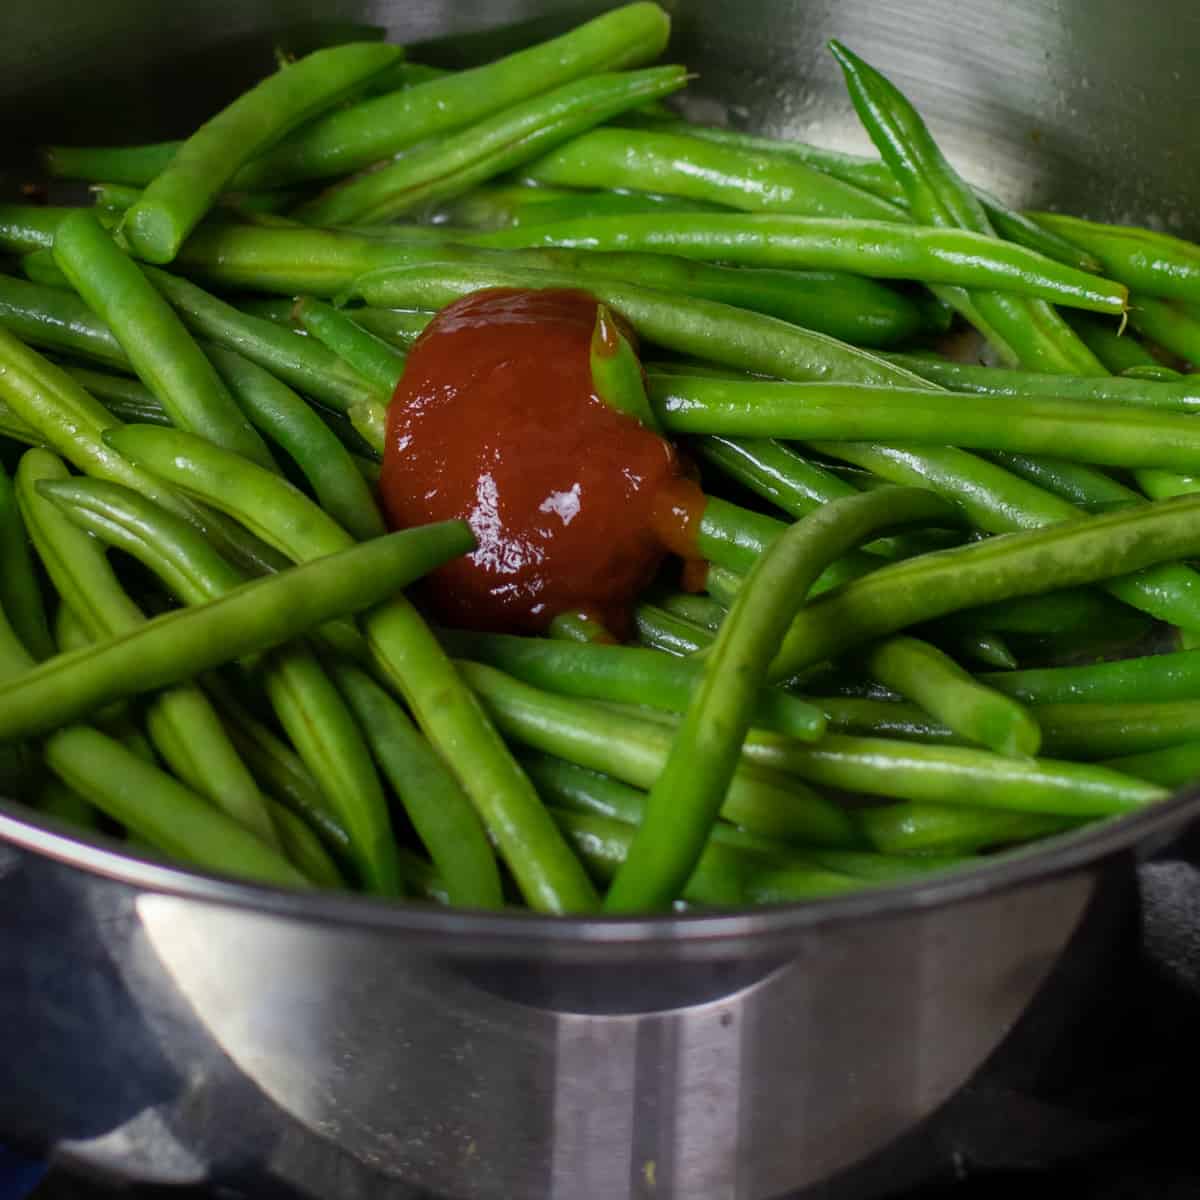 A spoonful of sriracha sauce on some raw green beans.